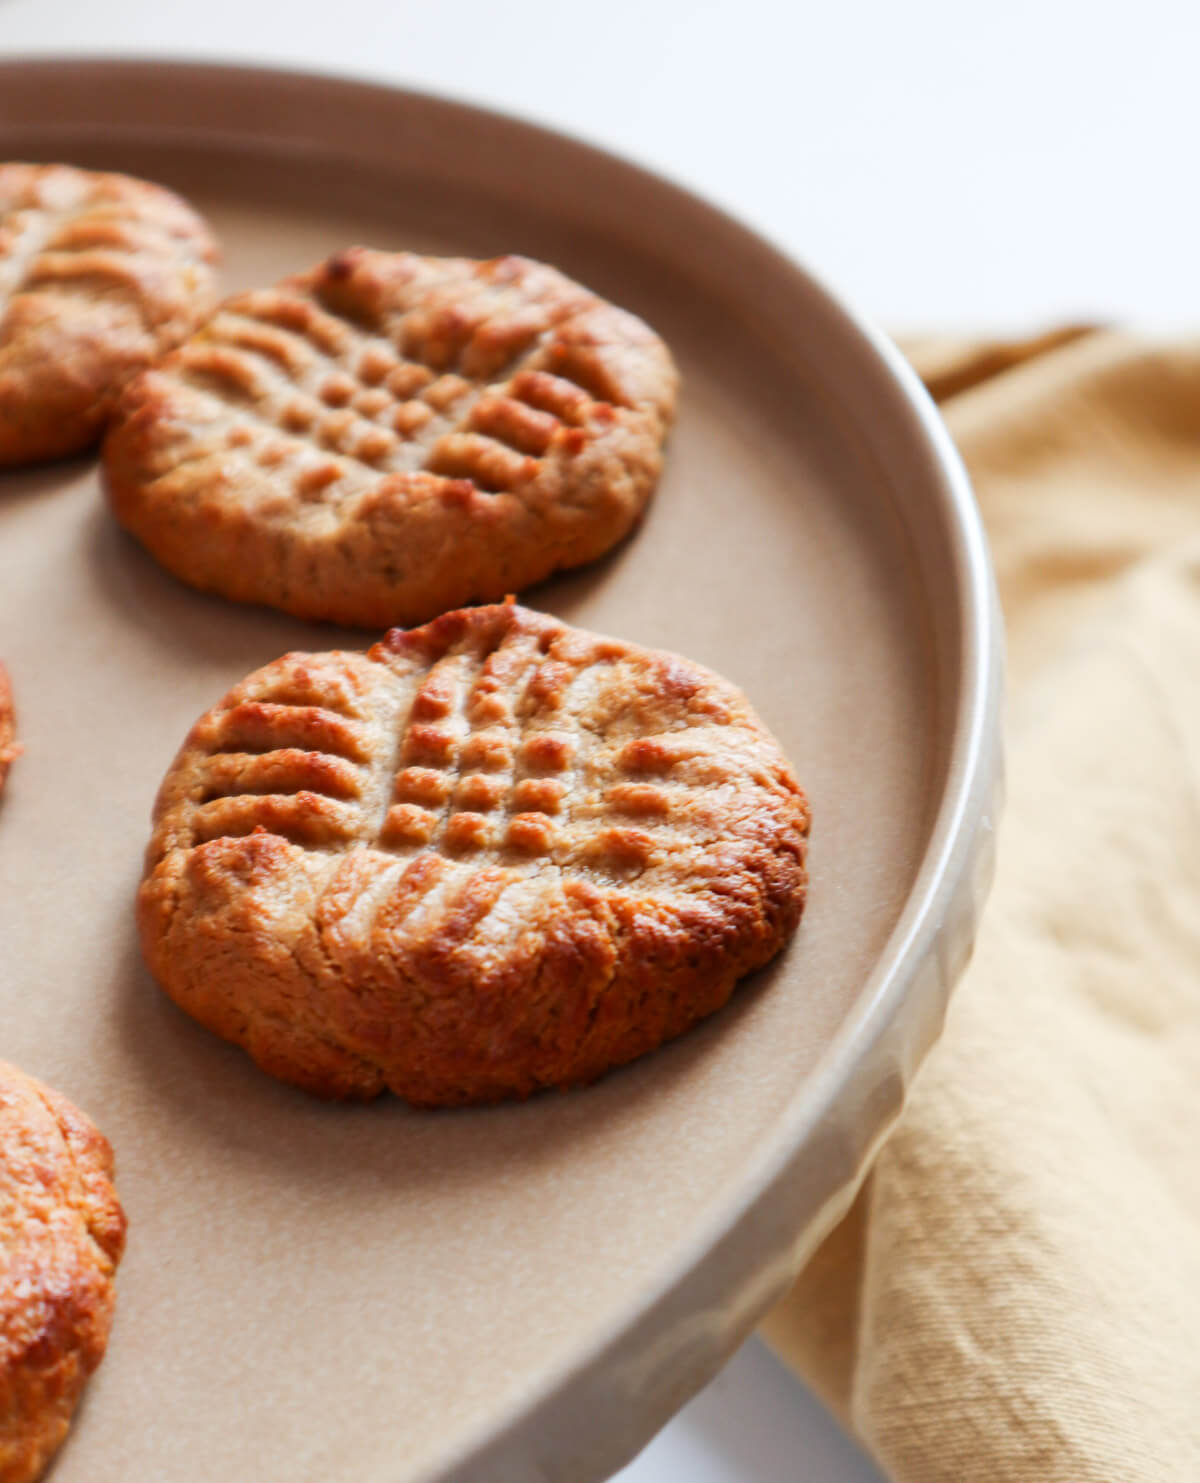 Baked peanut butter cookies on grey plate